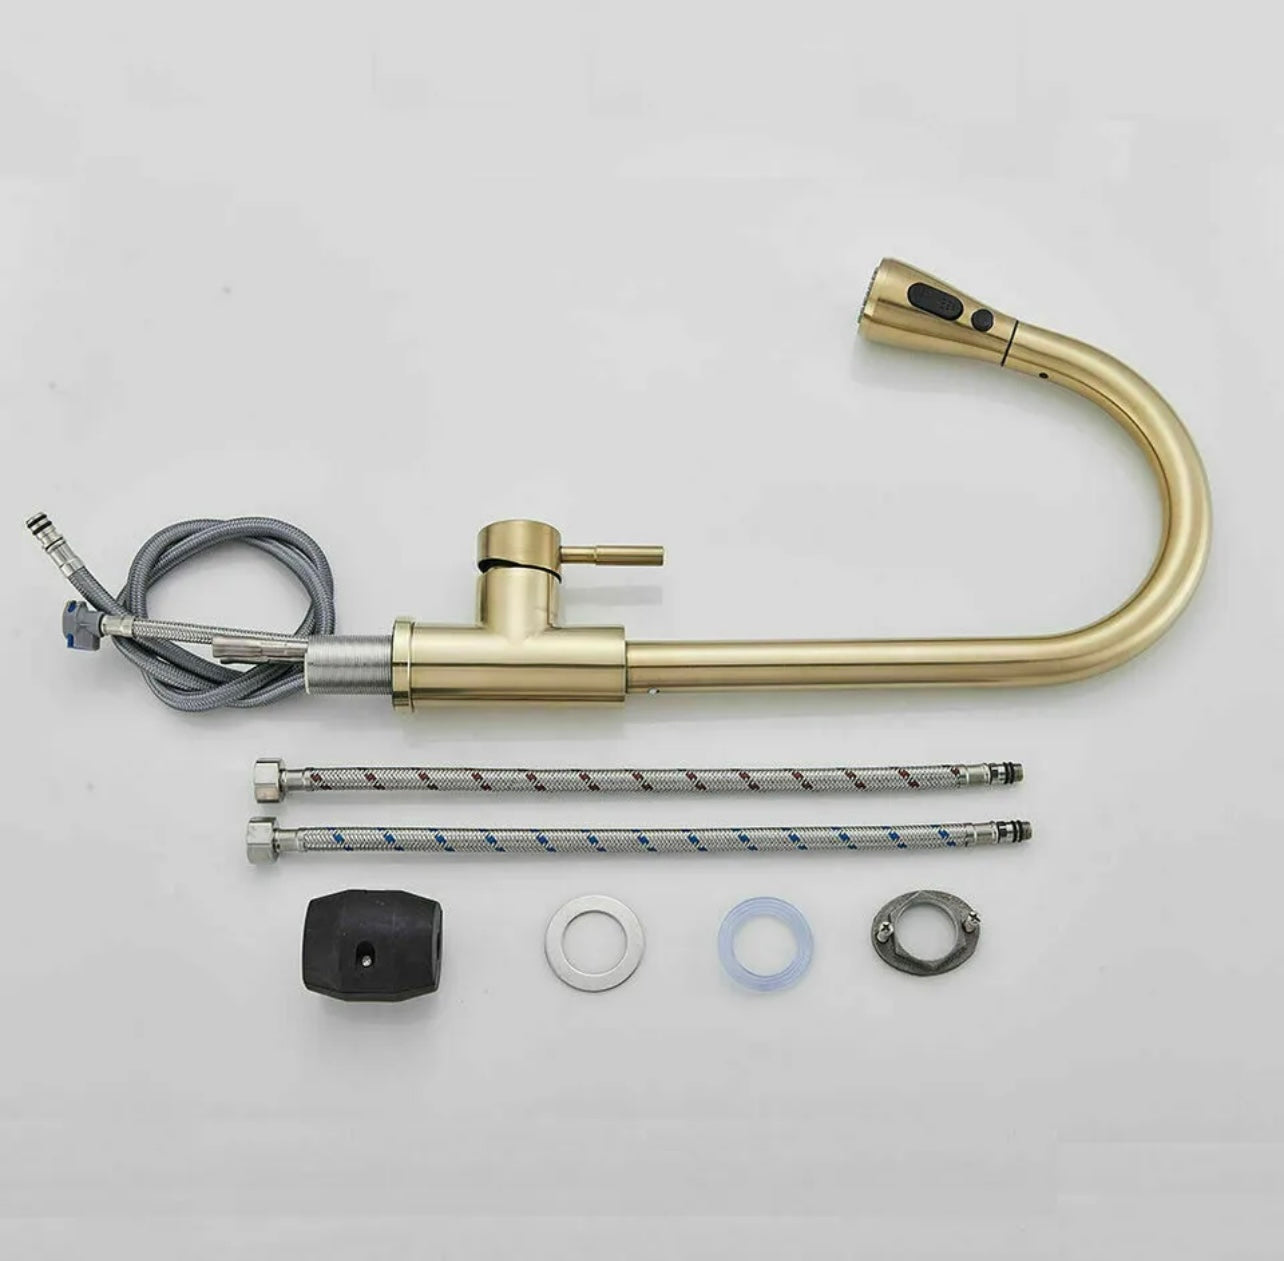 Brushed gold pull out kitchen faucet